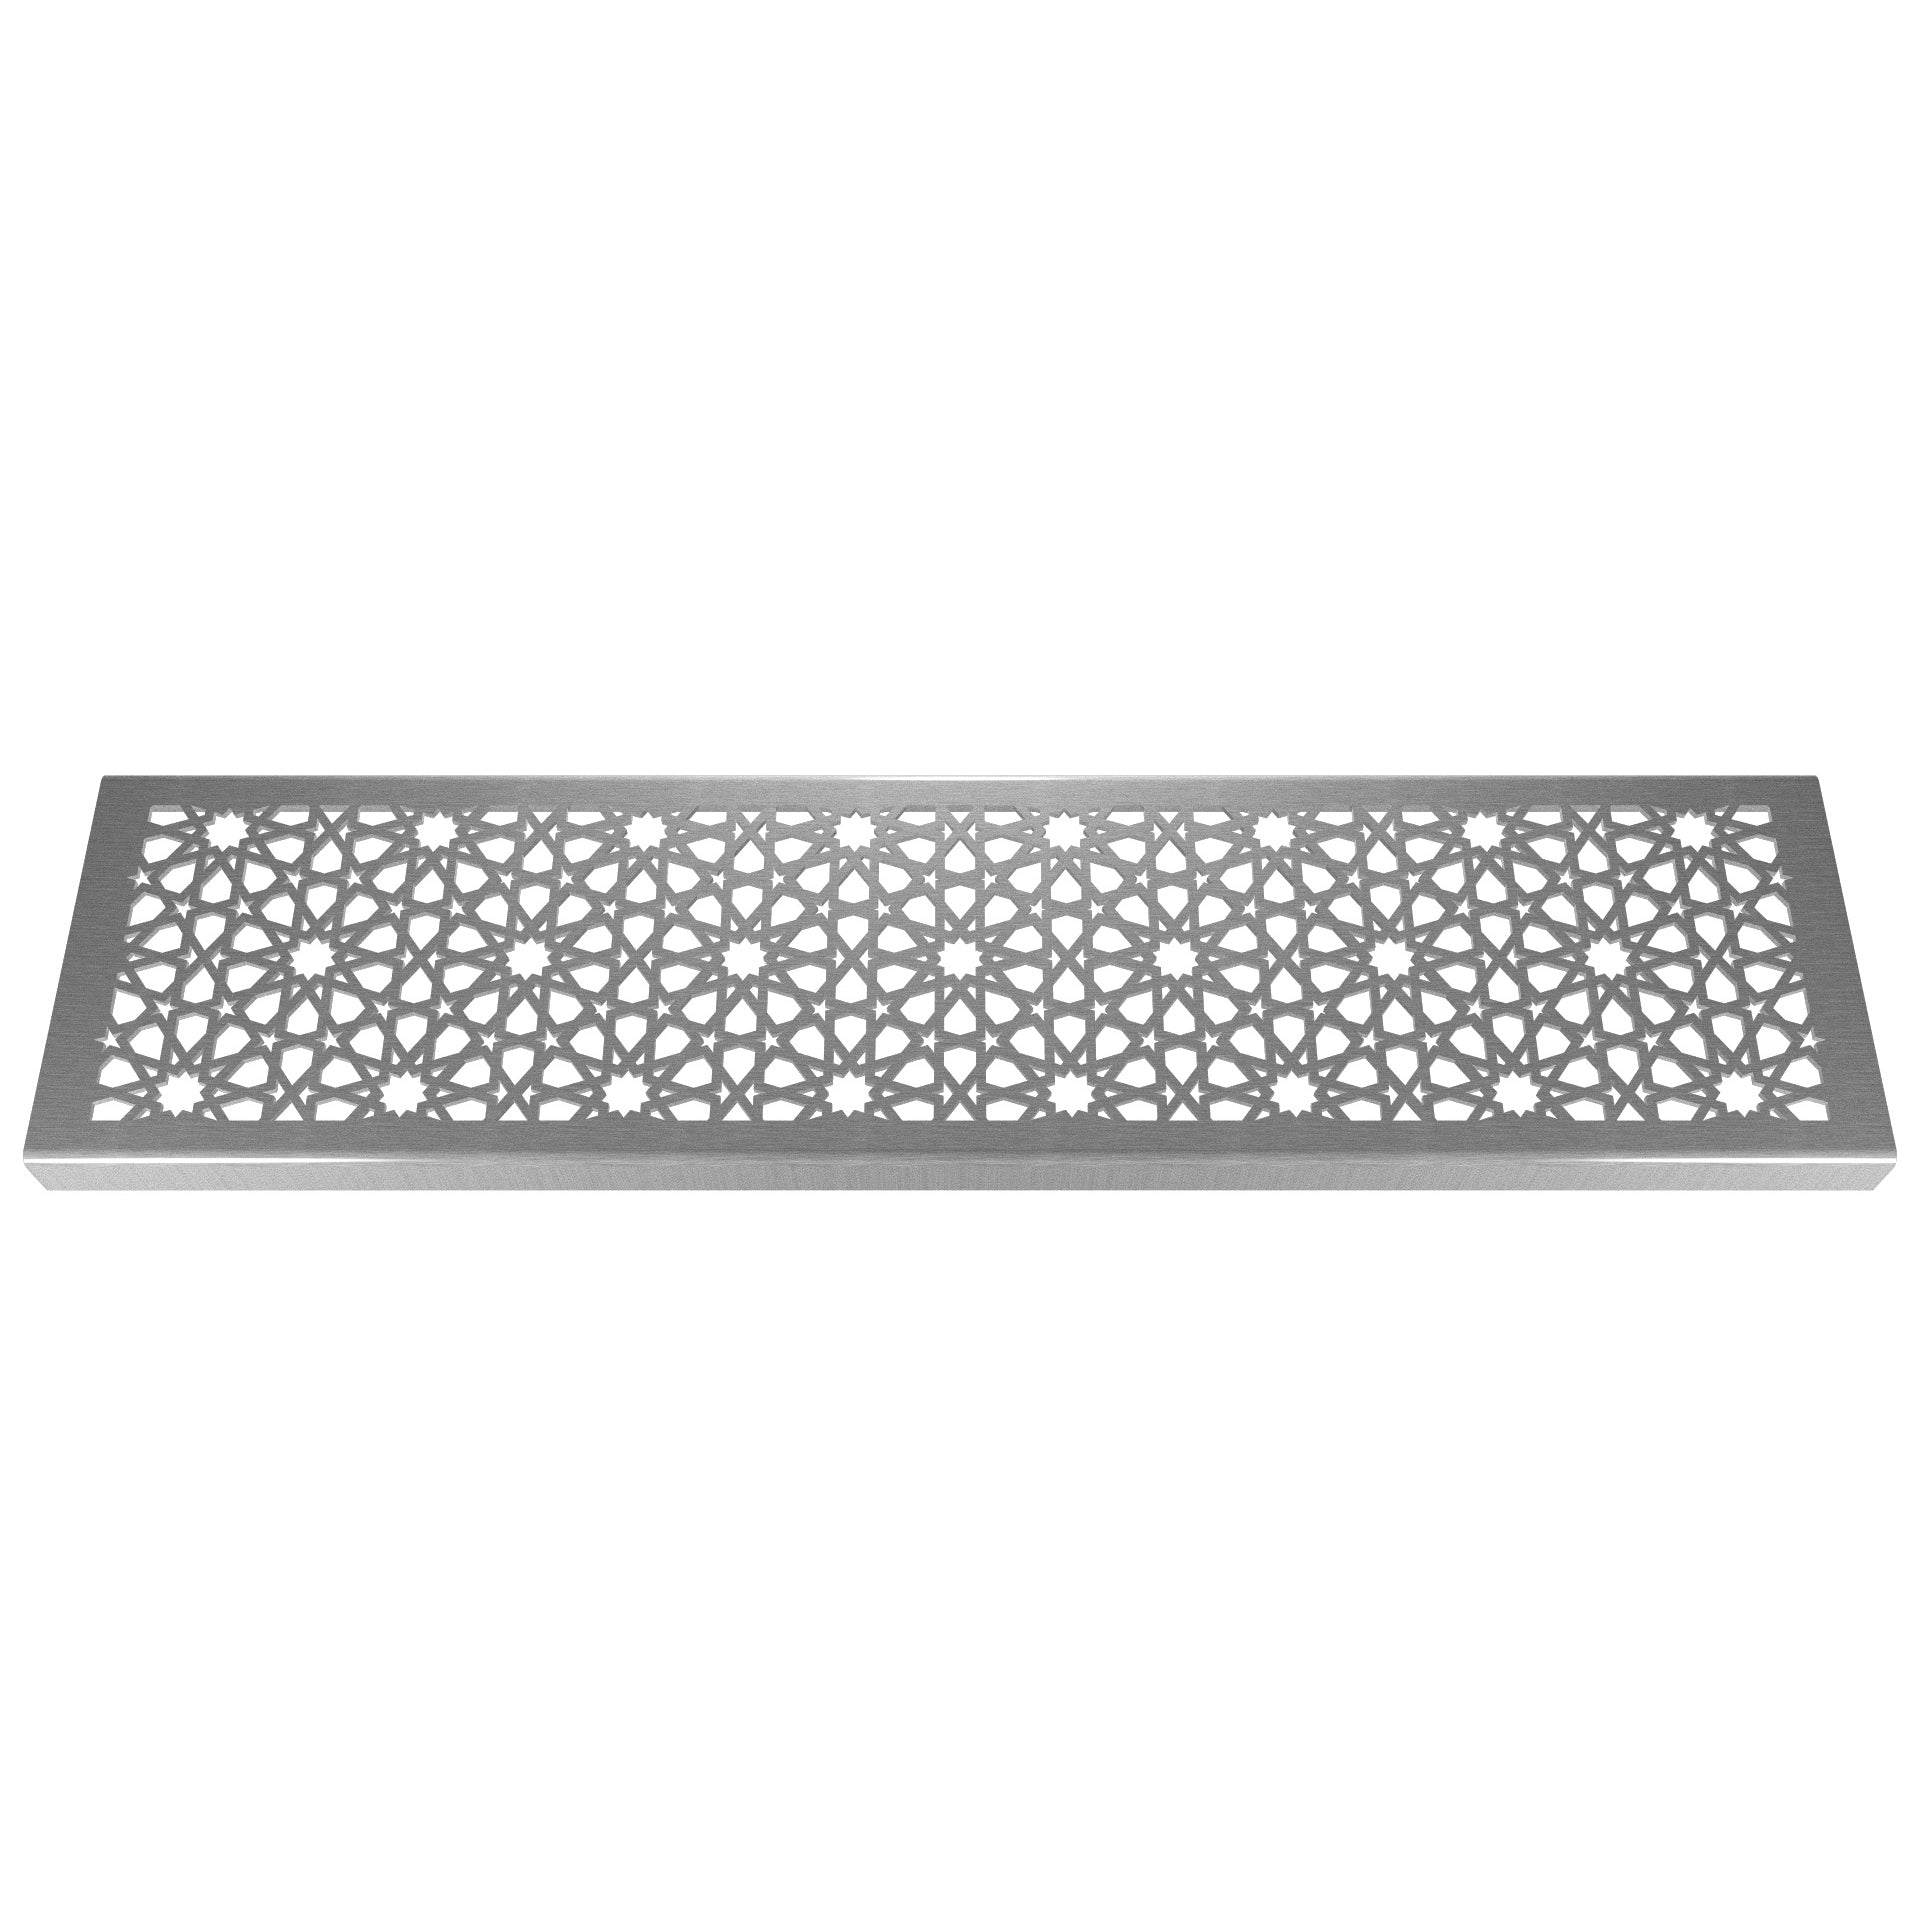 [CLEARANCE] Morisco 304 Stainless Steel Channel Drain Grate 125 x 1200mm (5 Inch)